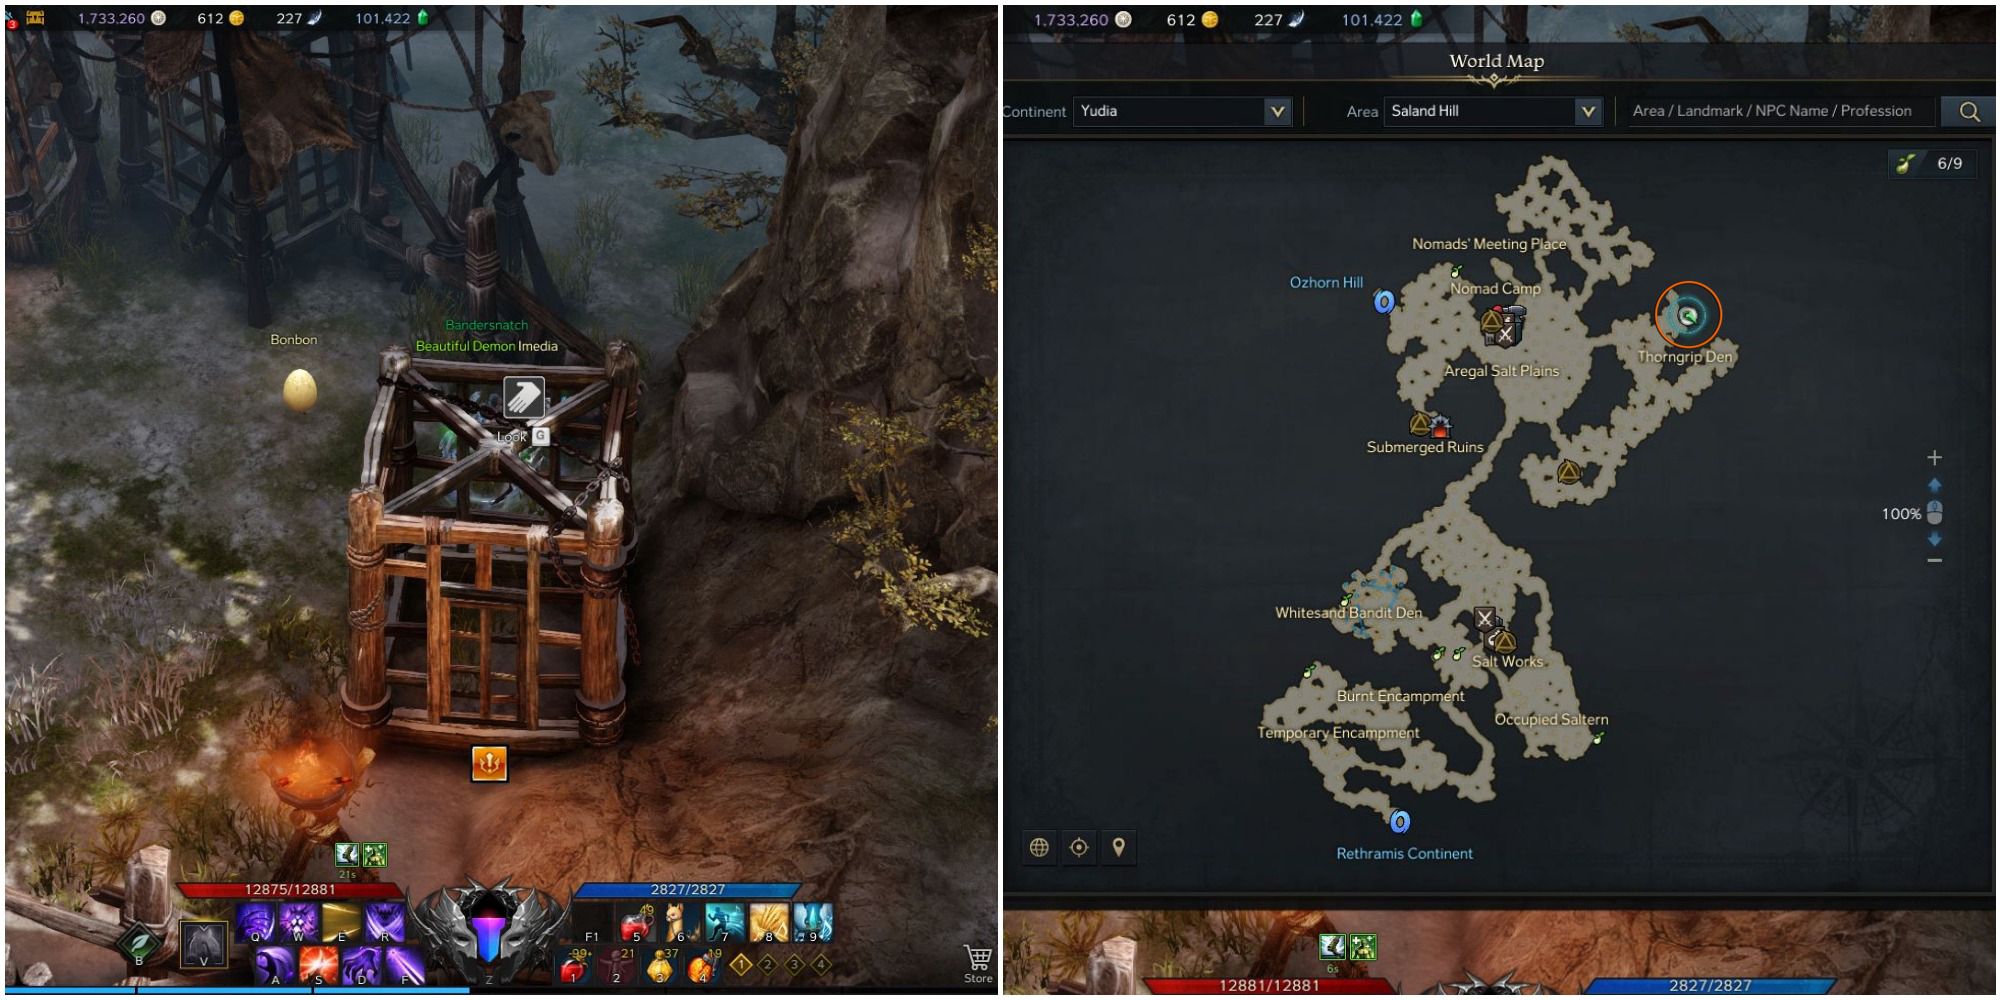 Split image of a player standing behind a cage in Thorngrip Den and a map of Saland Hill